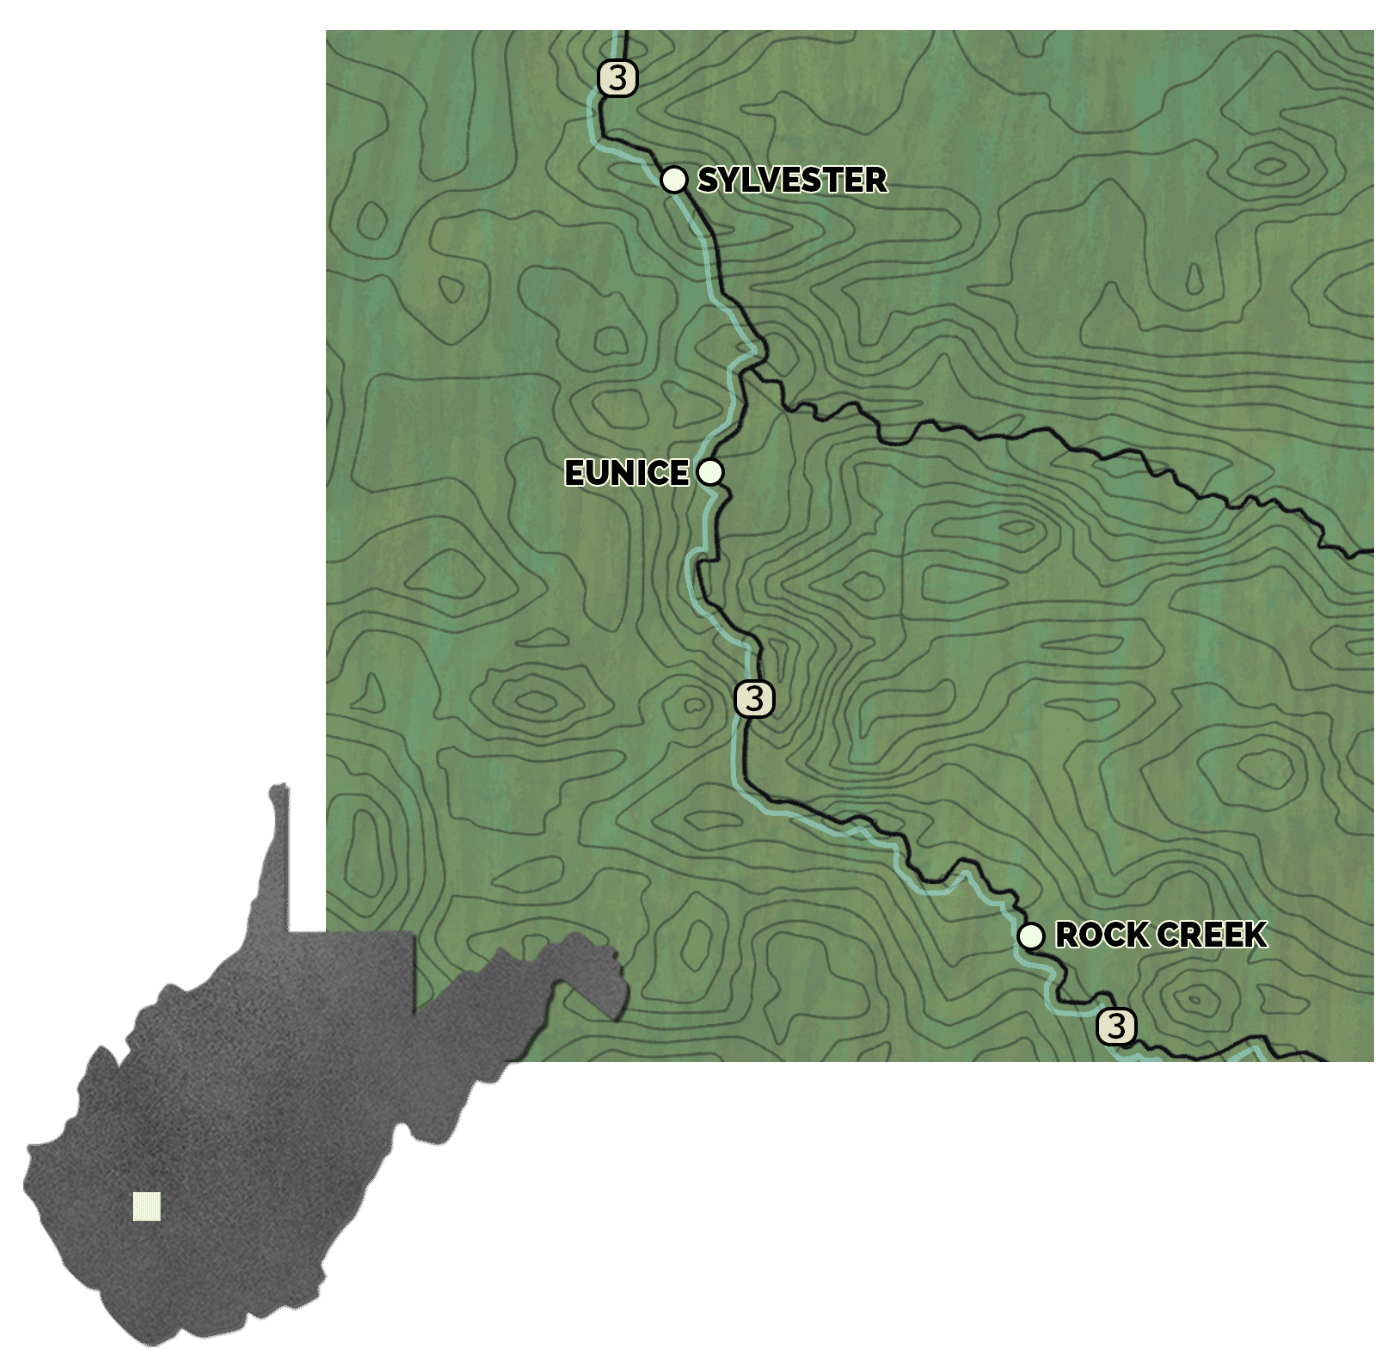 Illustrated map showing a section of route 3 in West Virginia and the towns Sylvester, Eunice, and Rock Creek. A small silhouette of West Virginia is in the bottom left corner to give a sense of location